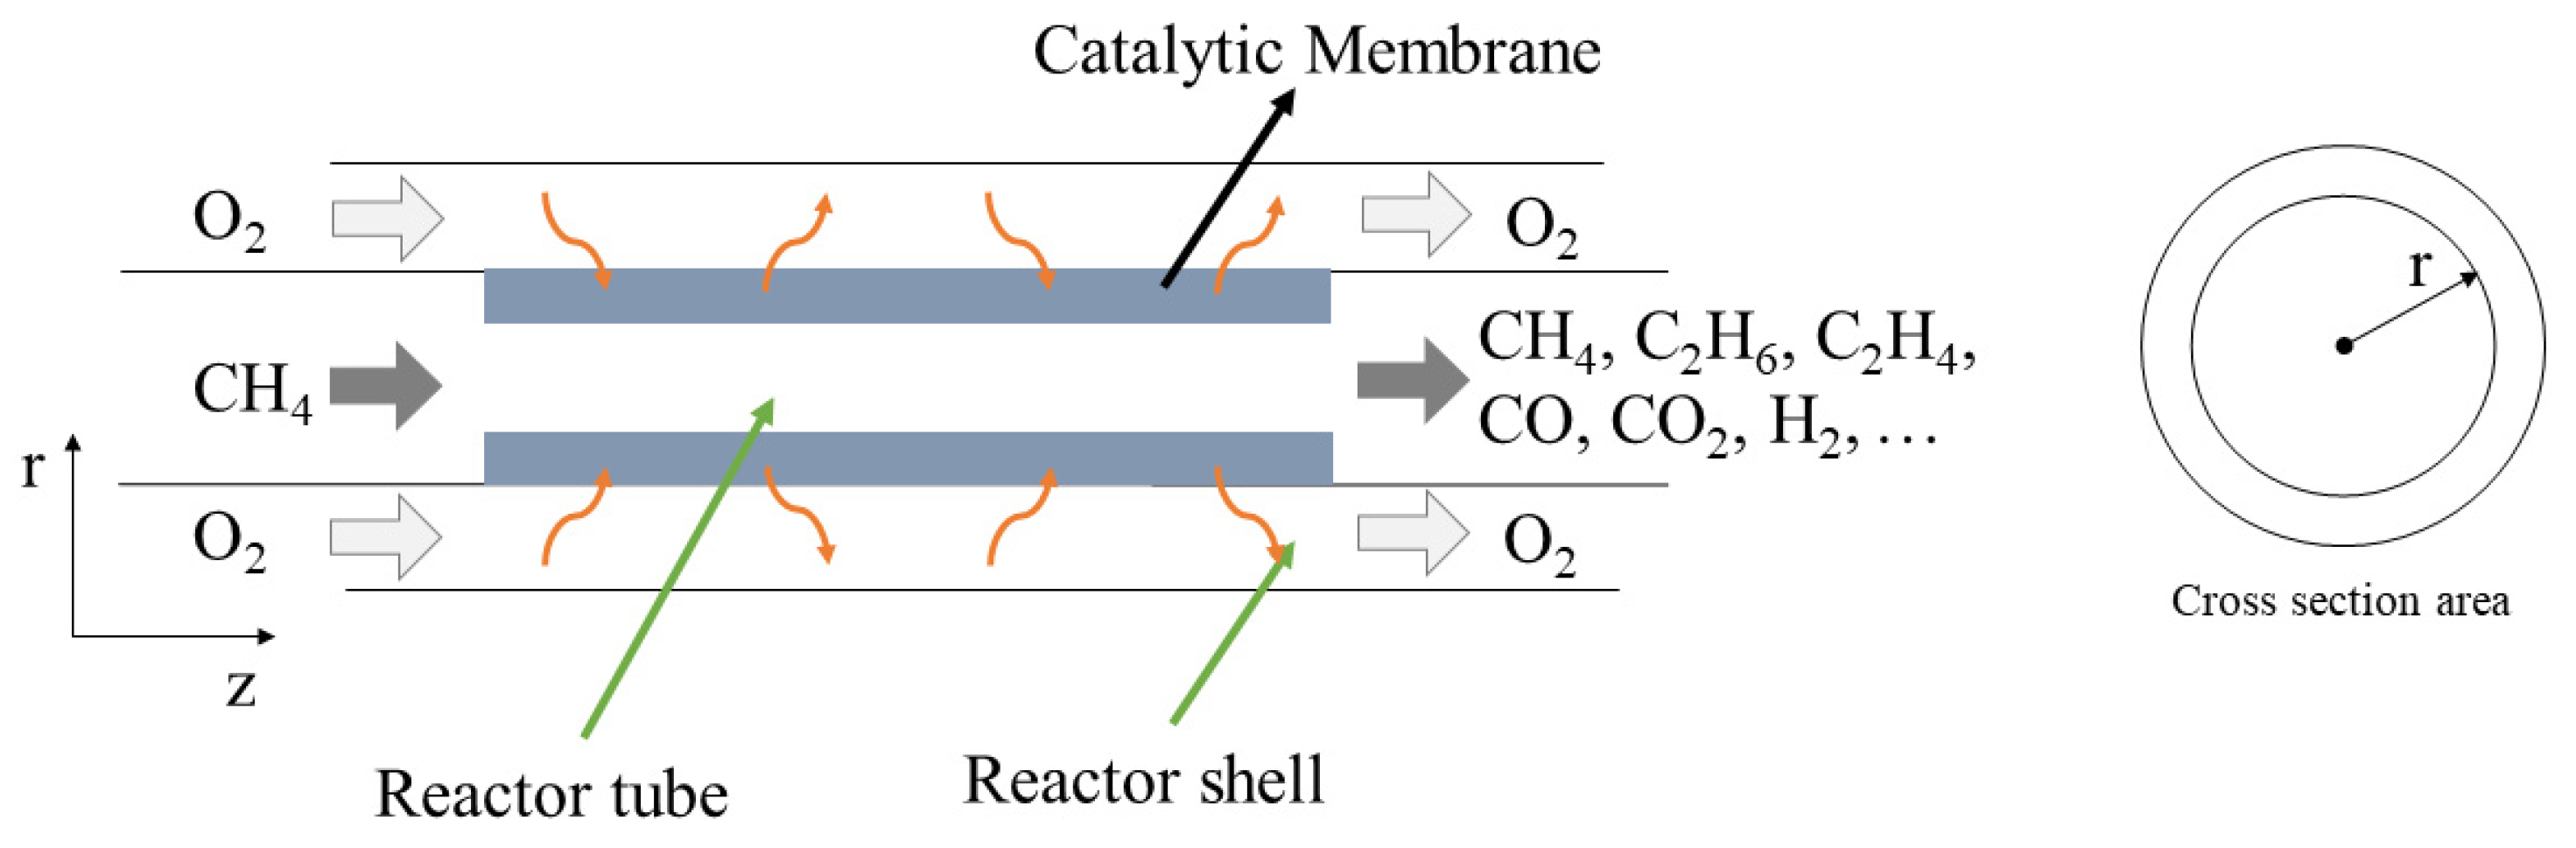 Processes | Free Full-Text | Oxidative Coupling of Methane for Ethylene  Production: Reviewing Kinetic Modelling Approaches, Thermodynamics and  Catalysts | HTML